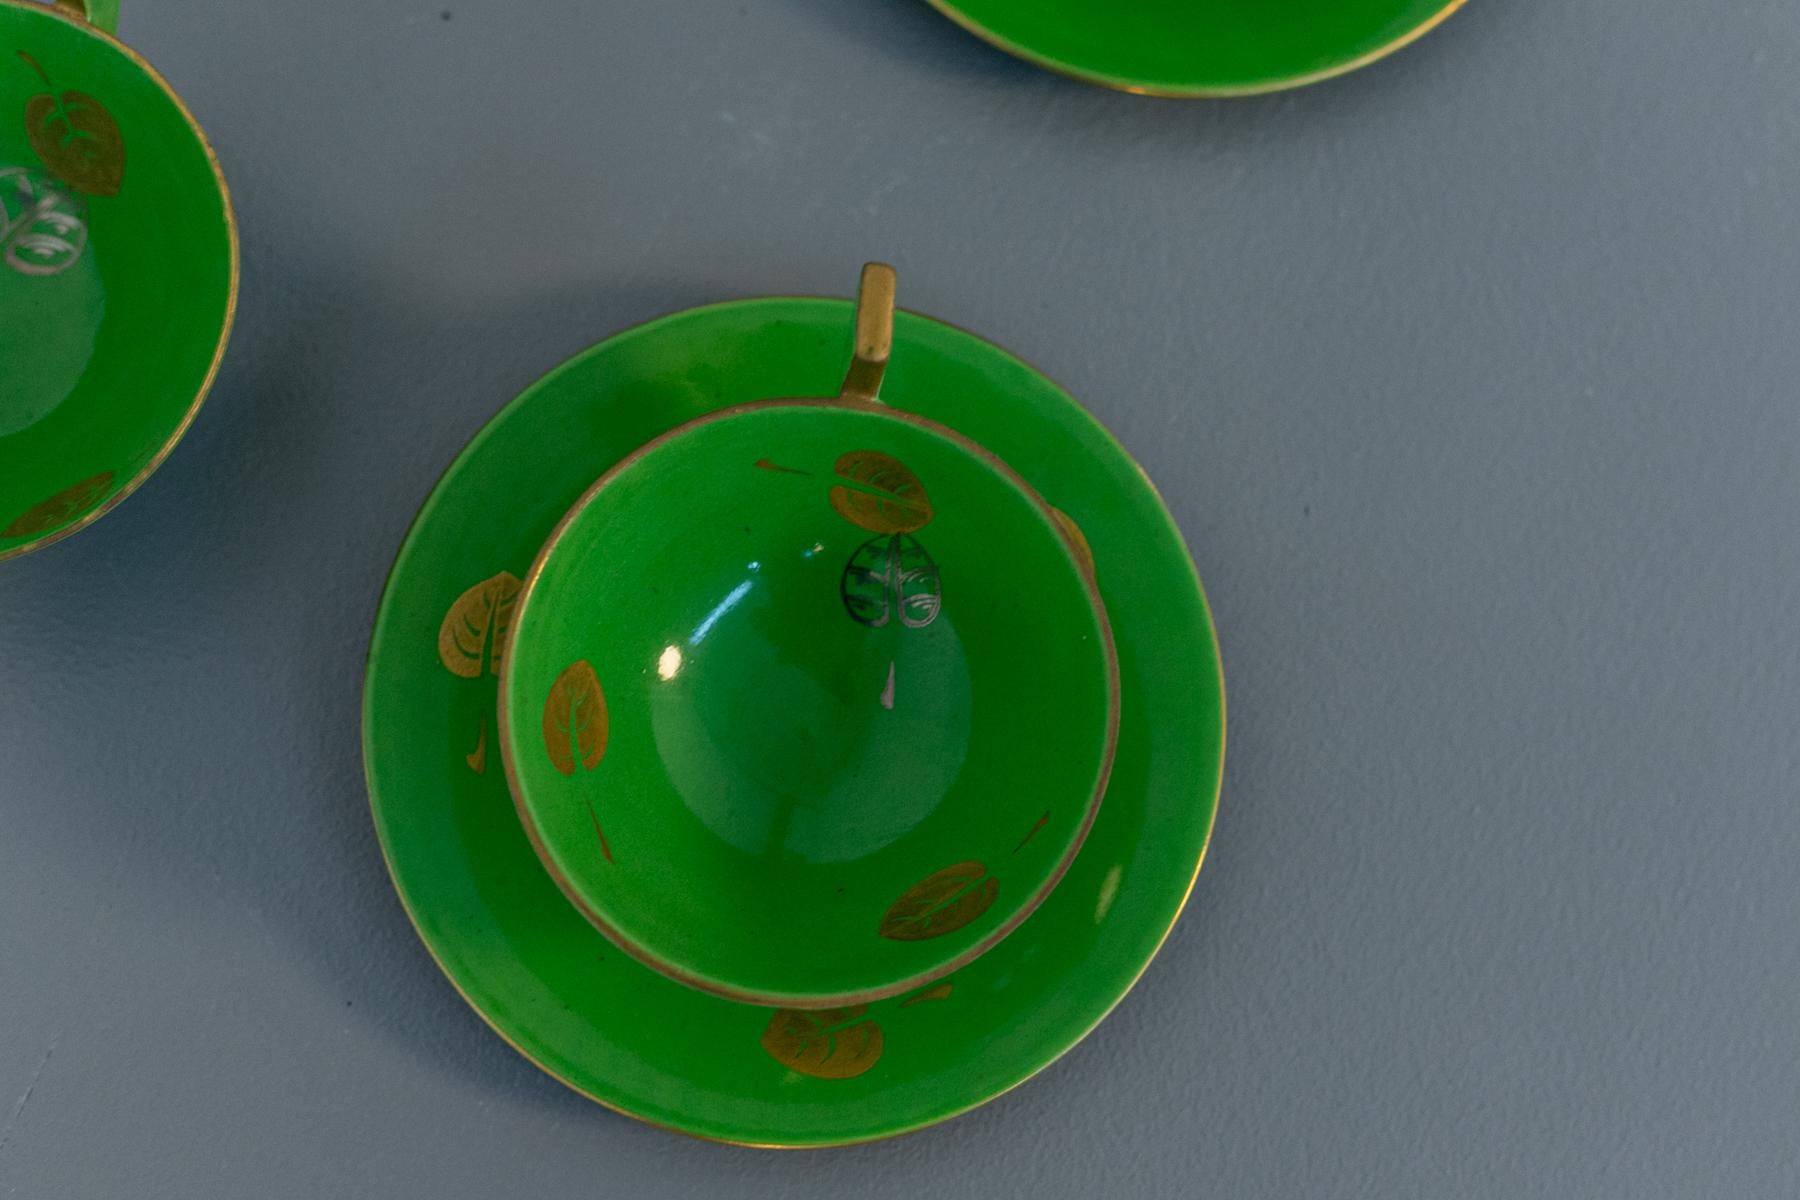 Wonderful green porcelain tea set designed in the 20's, of fine Italian manufacture.
The tea set is designed for three people and is composed of 9 pieces including 3 small tea cups, 3 saucers, 1 teapot, 1 sugar bowl and 1 creamer.
The set is made